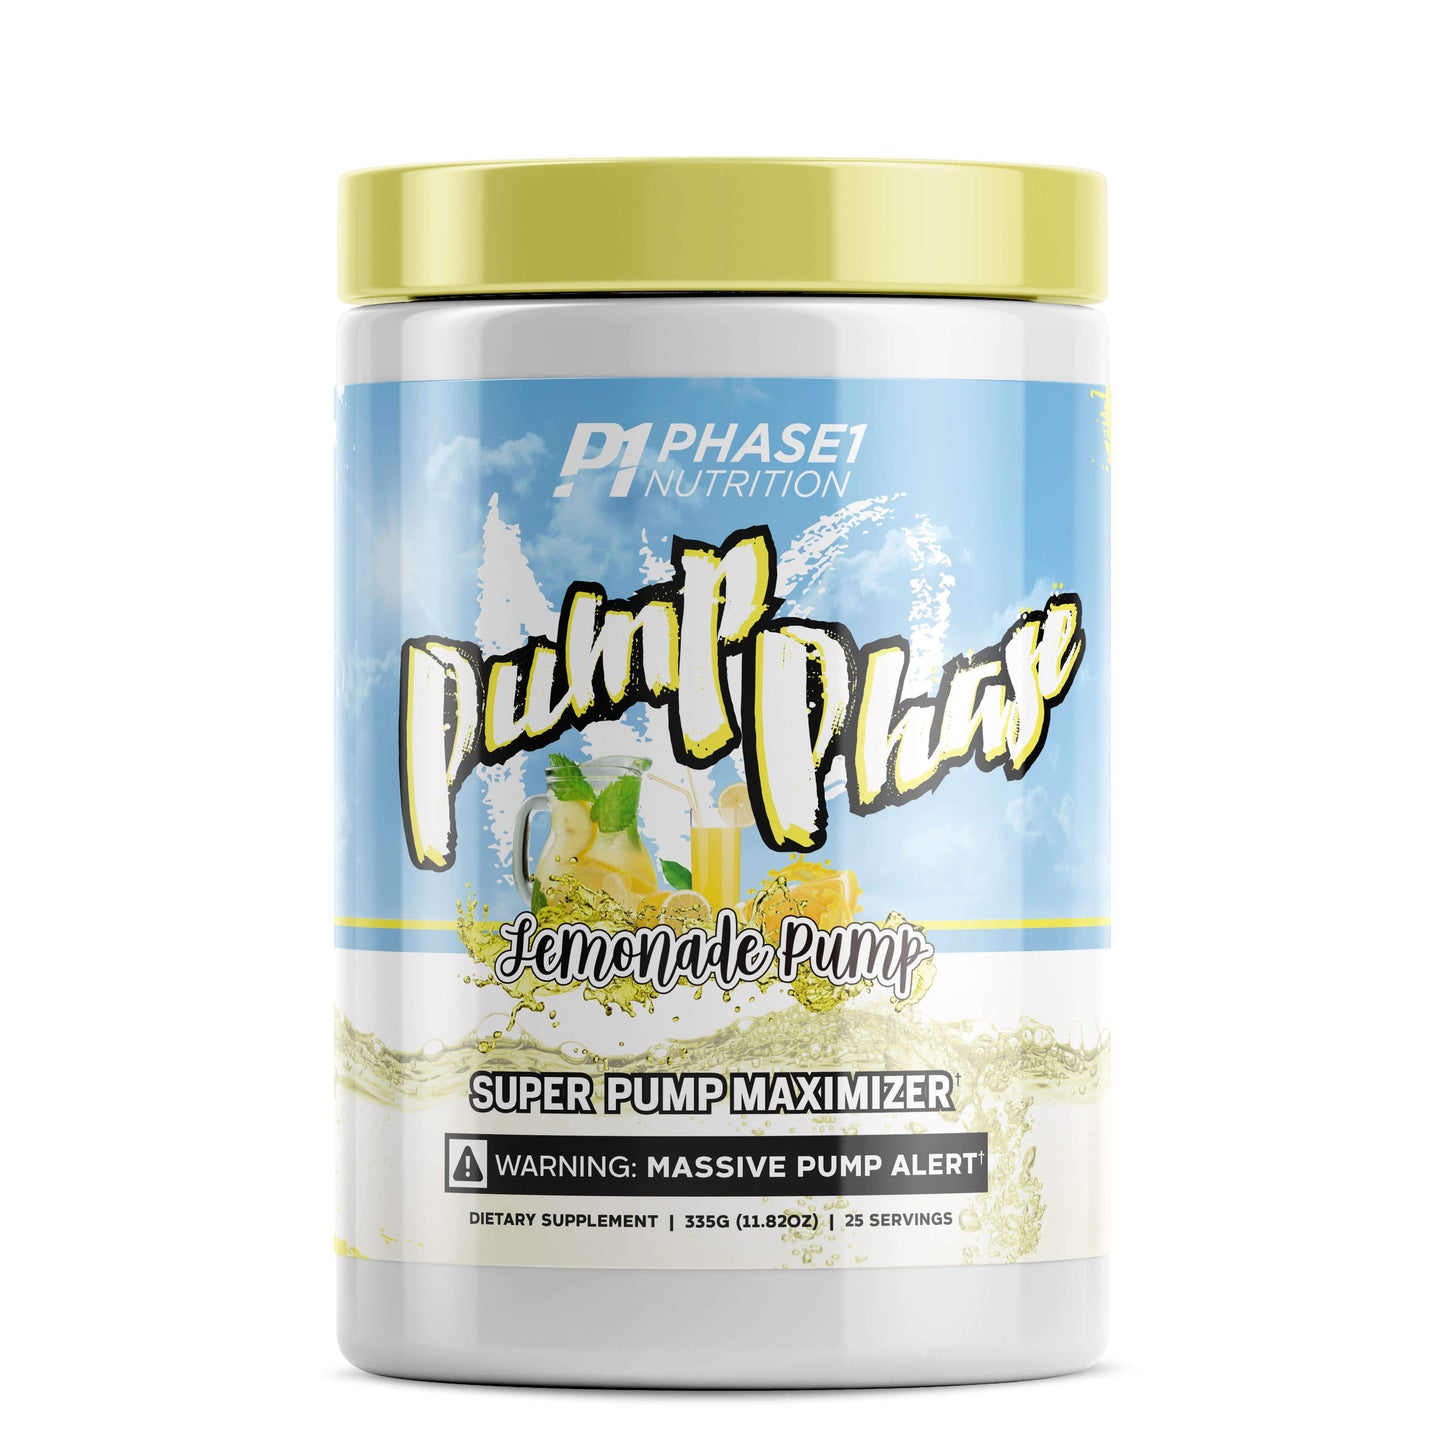 Phase One Nutrition Pump Phase